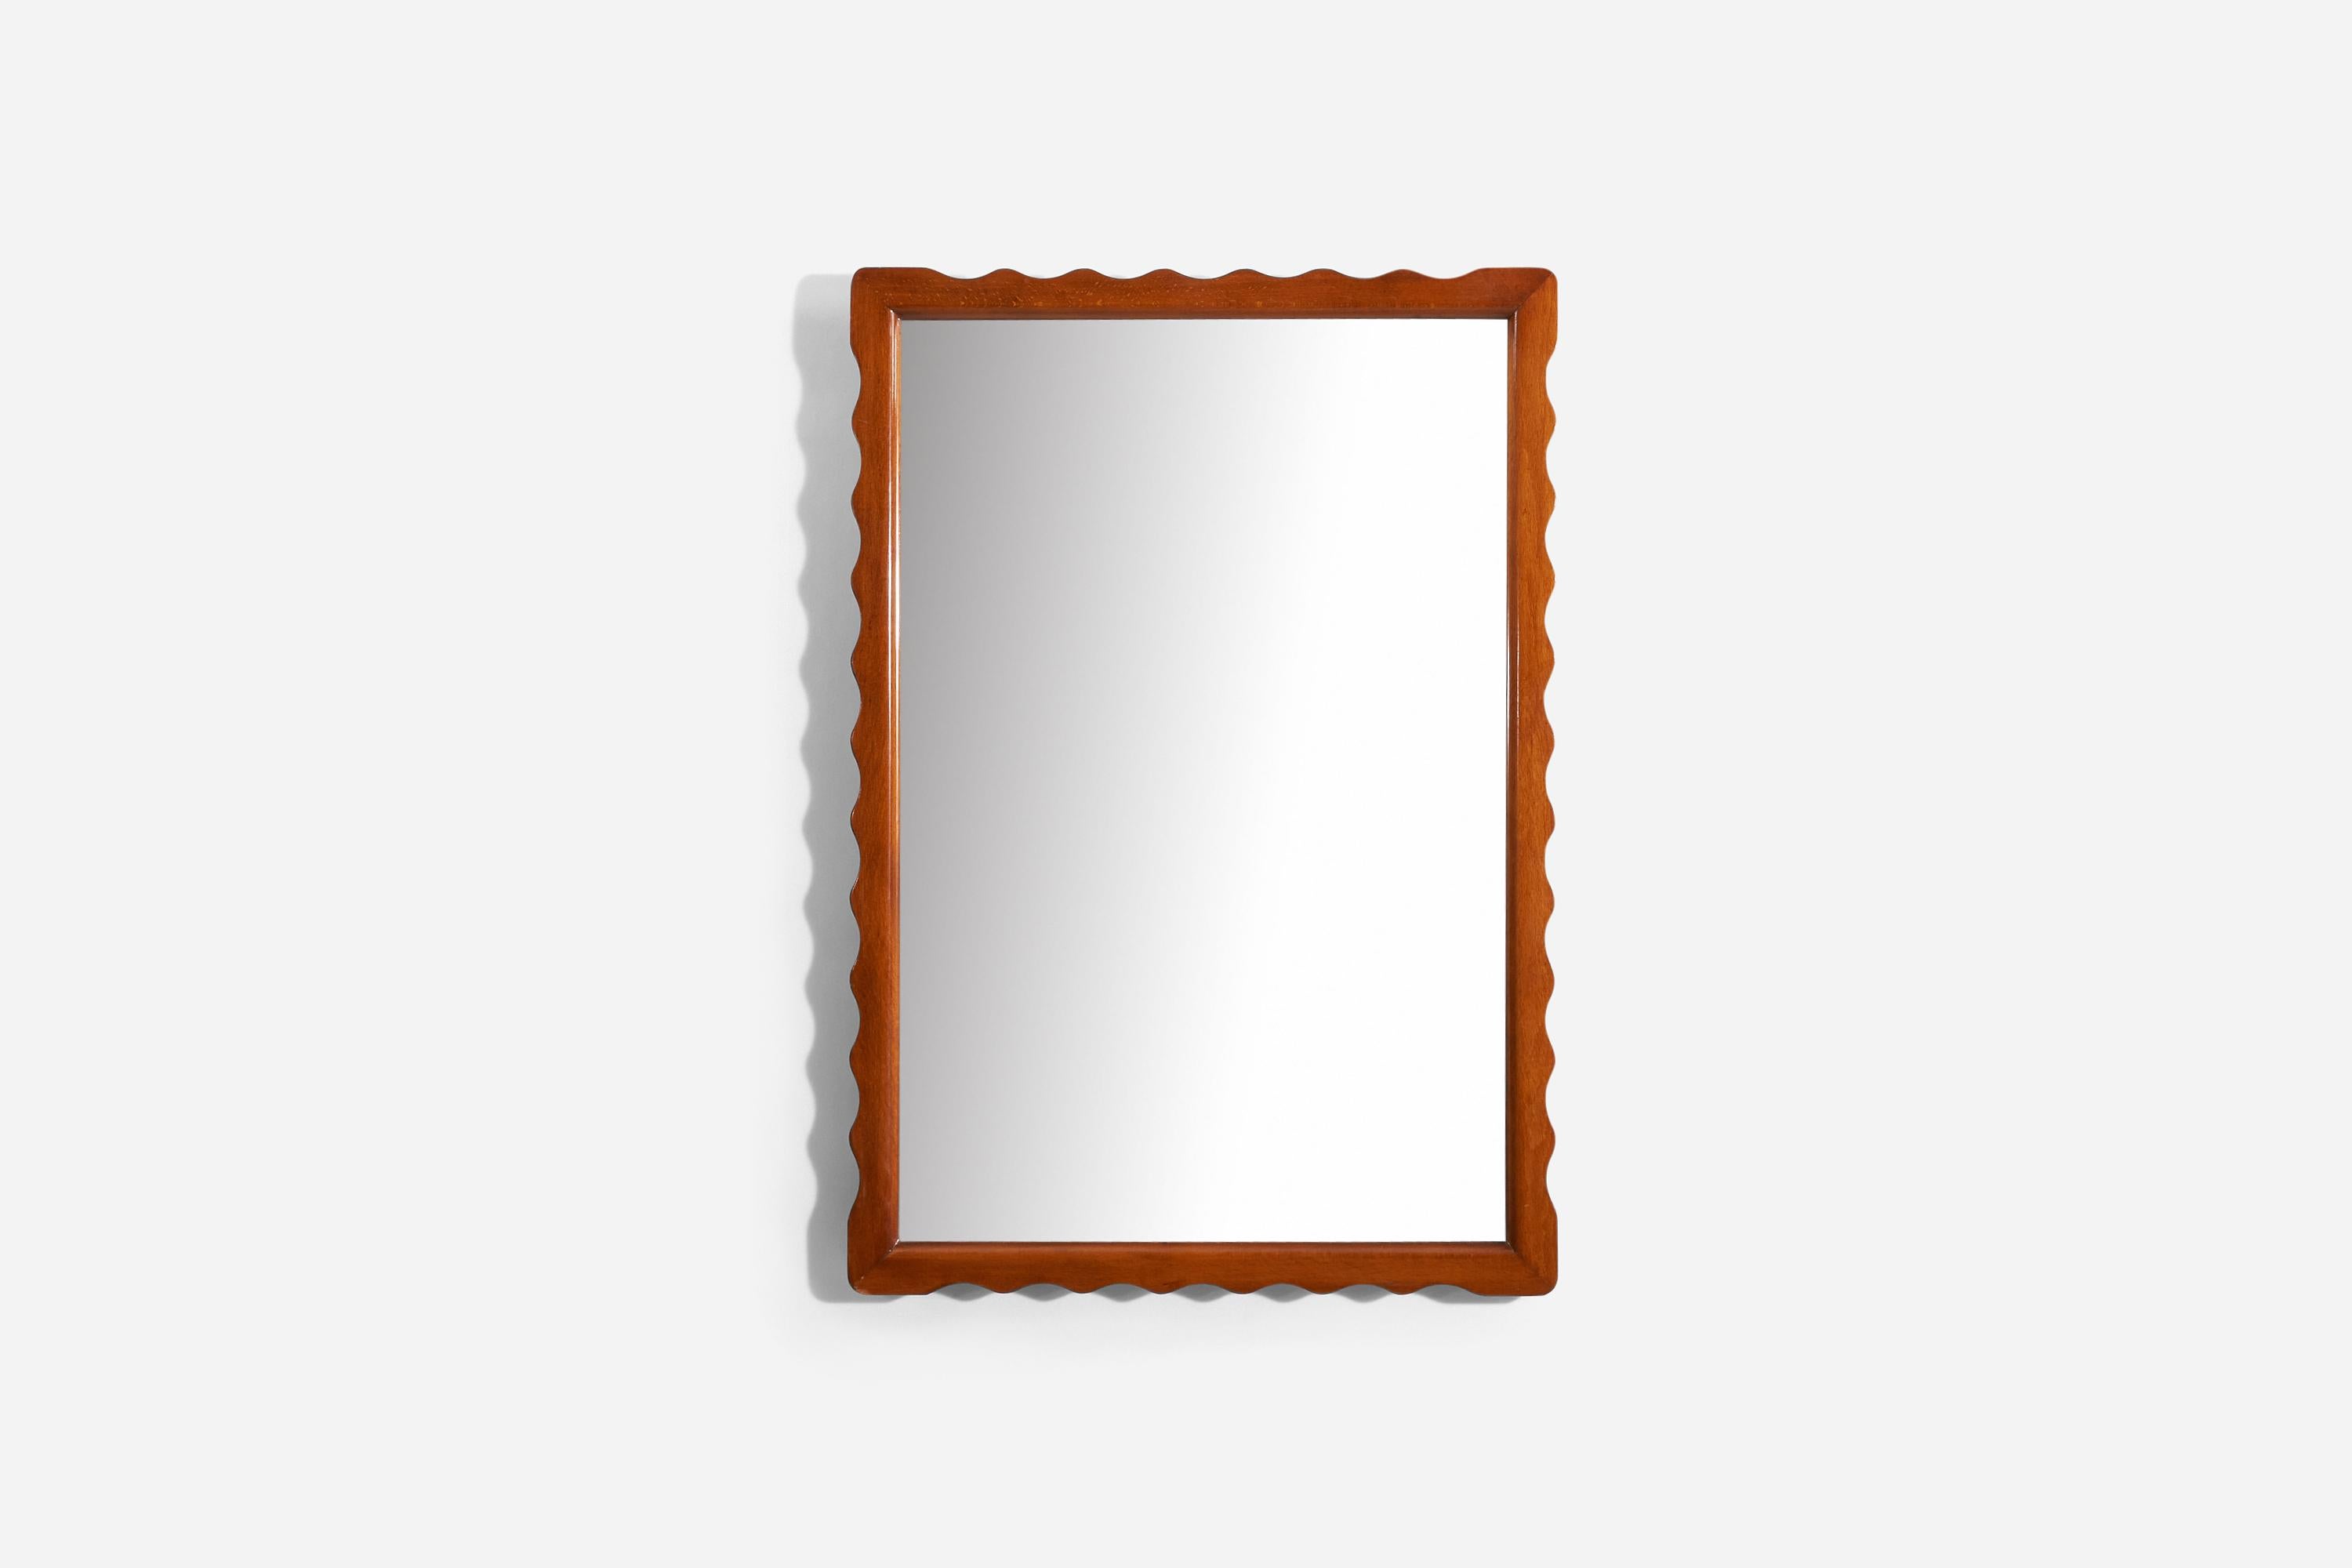 A carved solid wood frame mirror, designed and produced in Sweden c. 1940s.